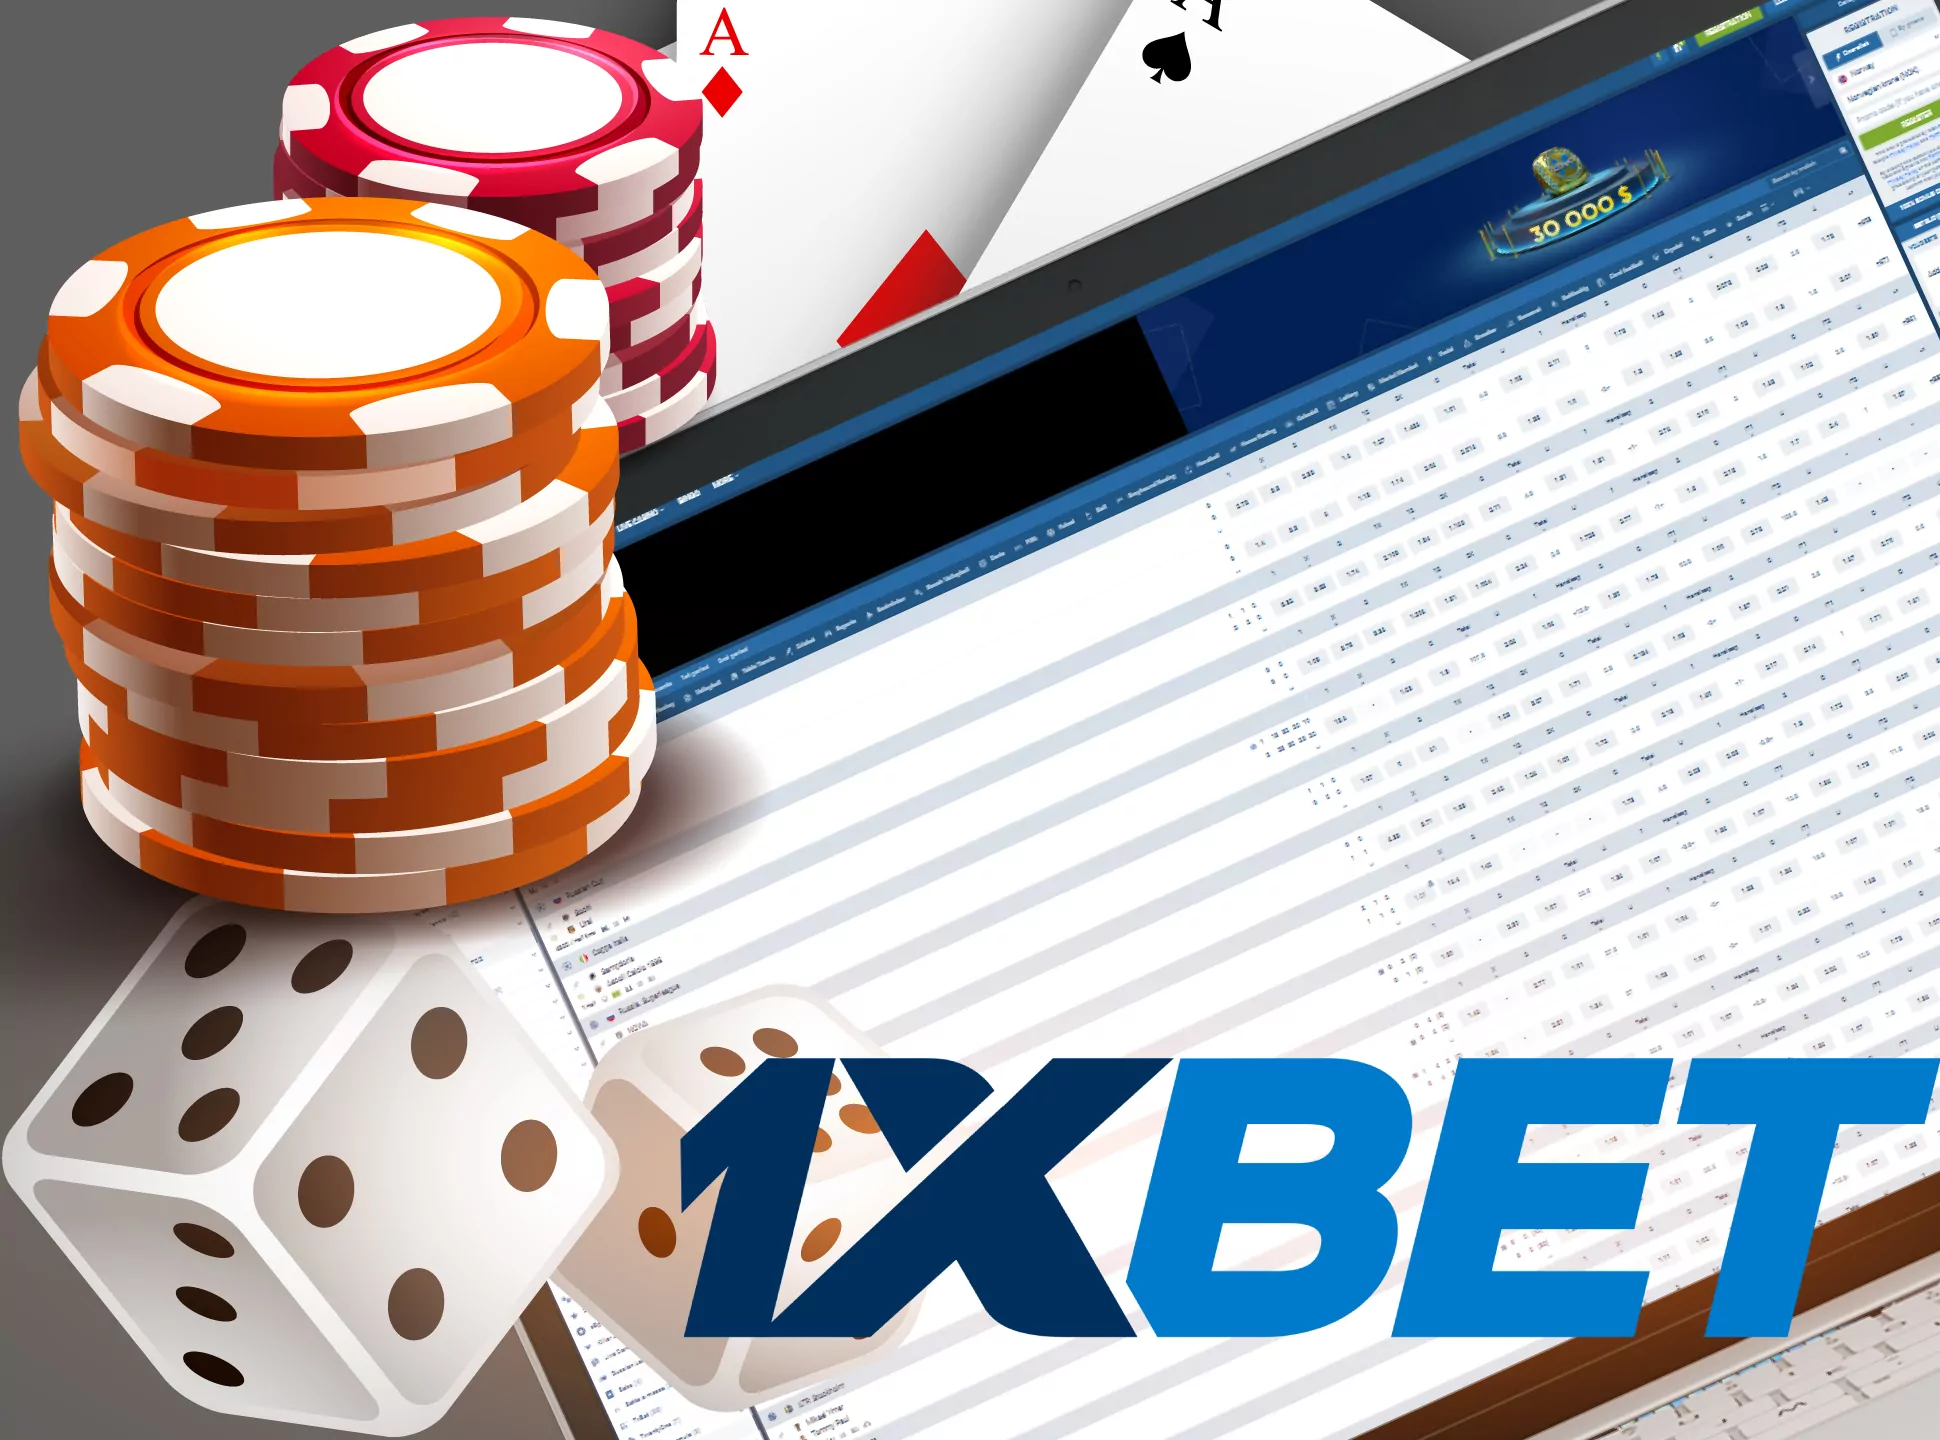 The 1xBet app has hundreds of casino games in its catalogue.